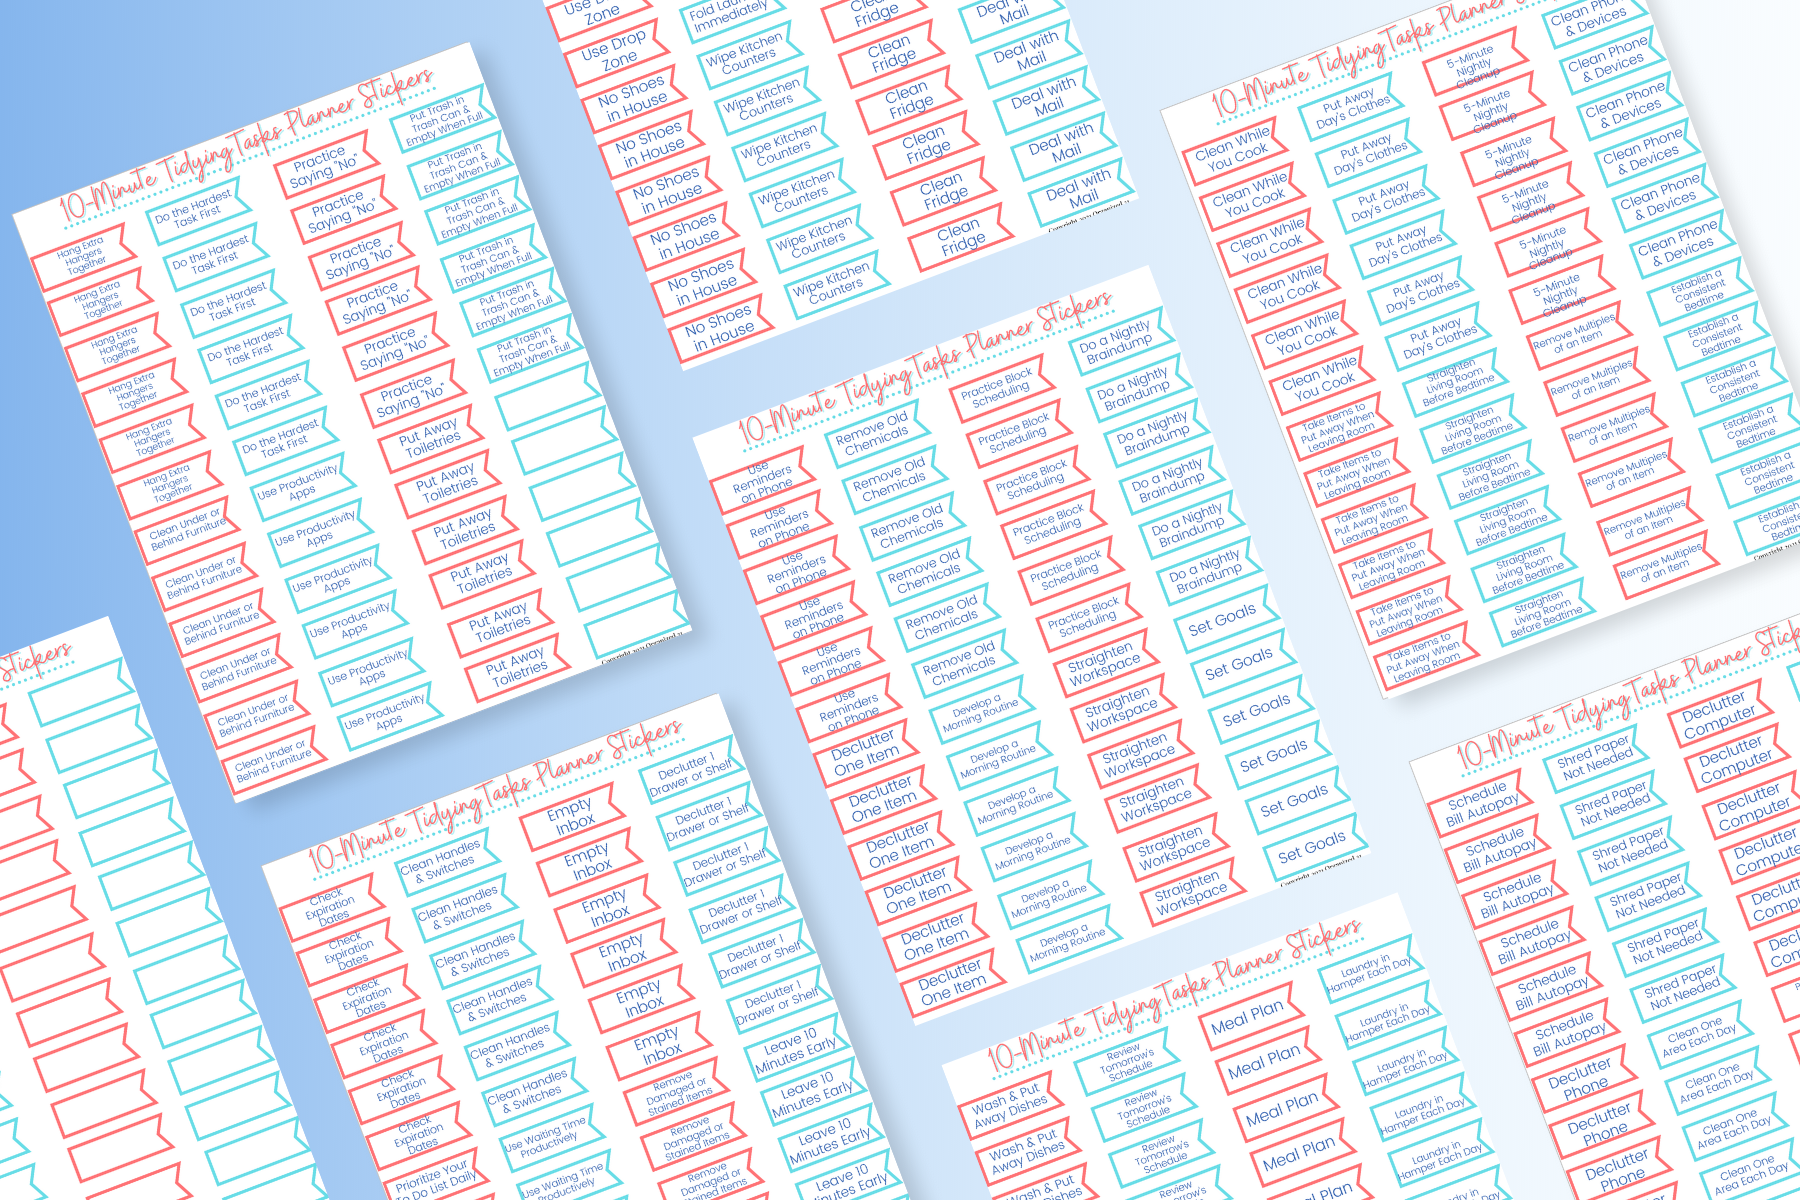 A set of 52 Weeks of Tidy Habit Planner Stickers on a blue background from Organized 31 Shop.